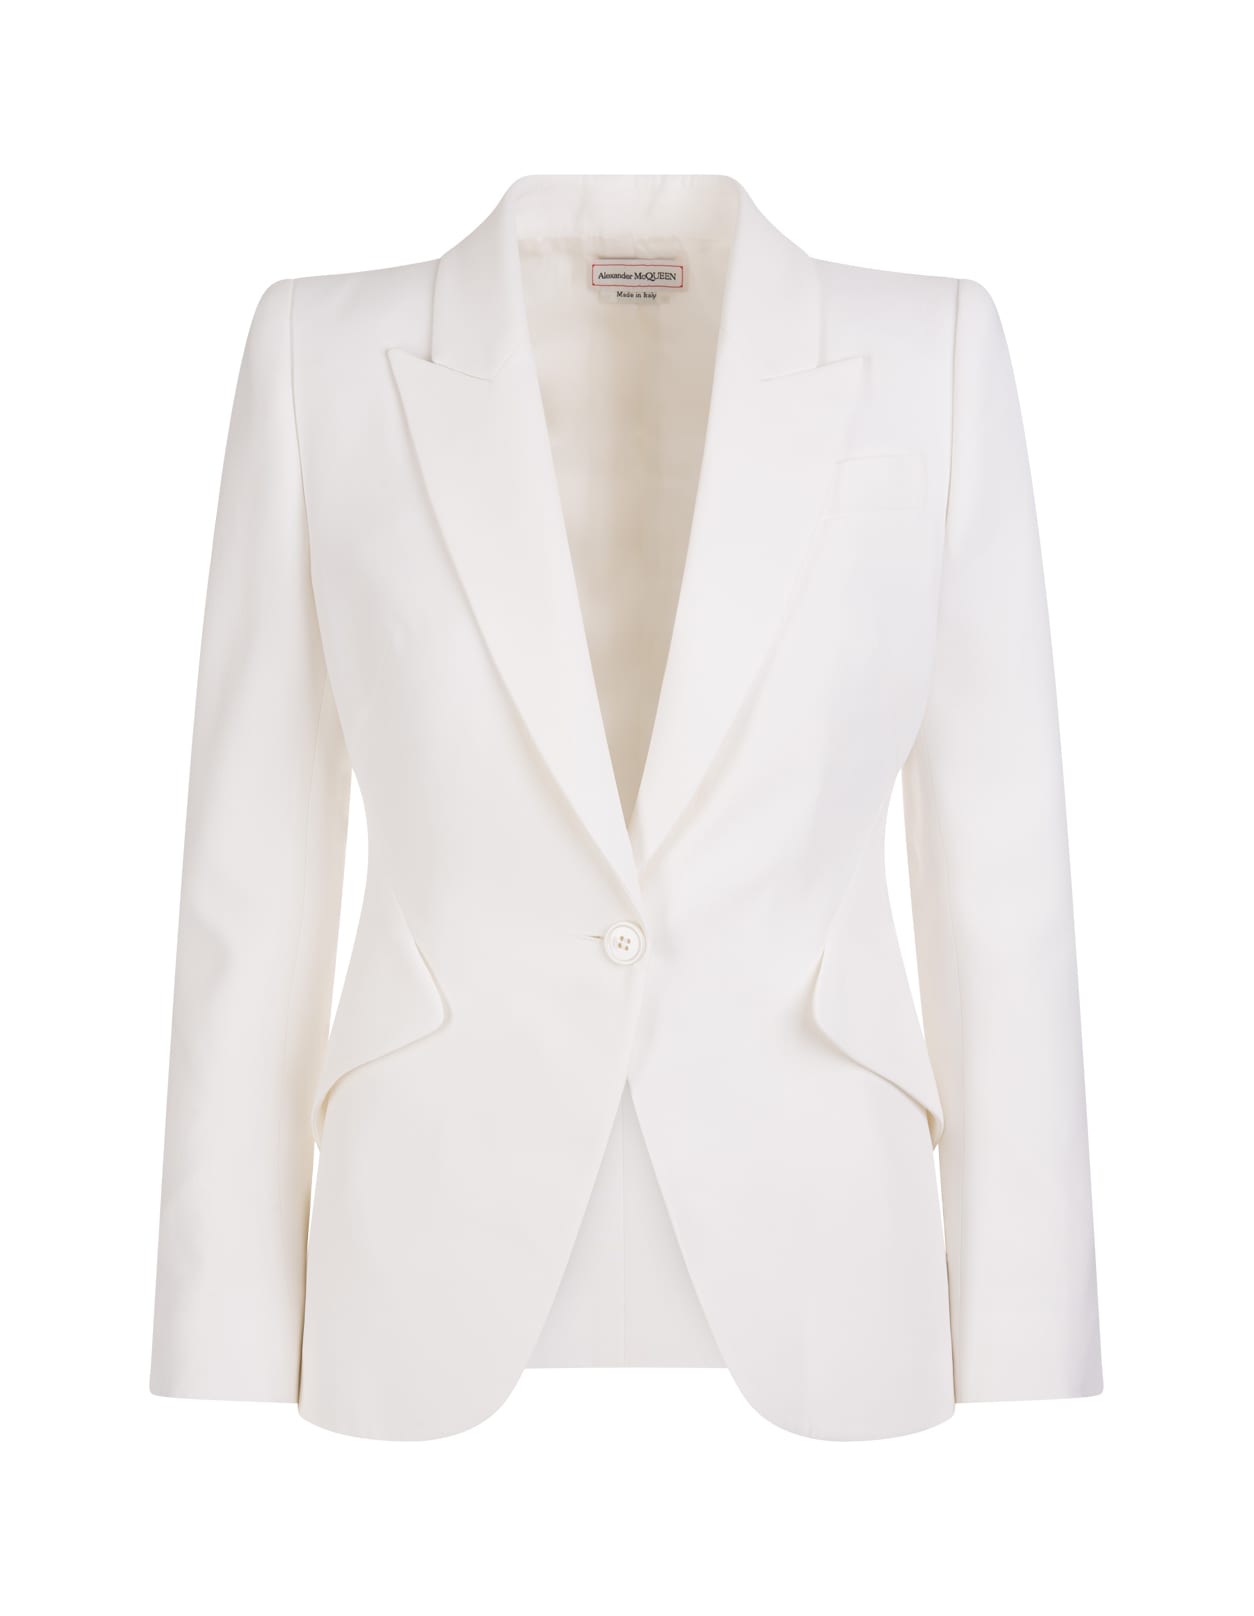 ALEXANDER MCQUEEN WOMAN LIGHT IVORY JACKET IN THIN CREPE WITH POINTED SHOULDERS